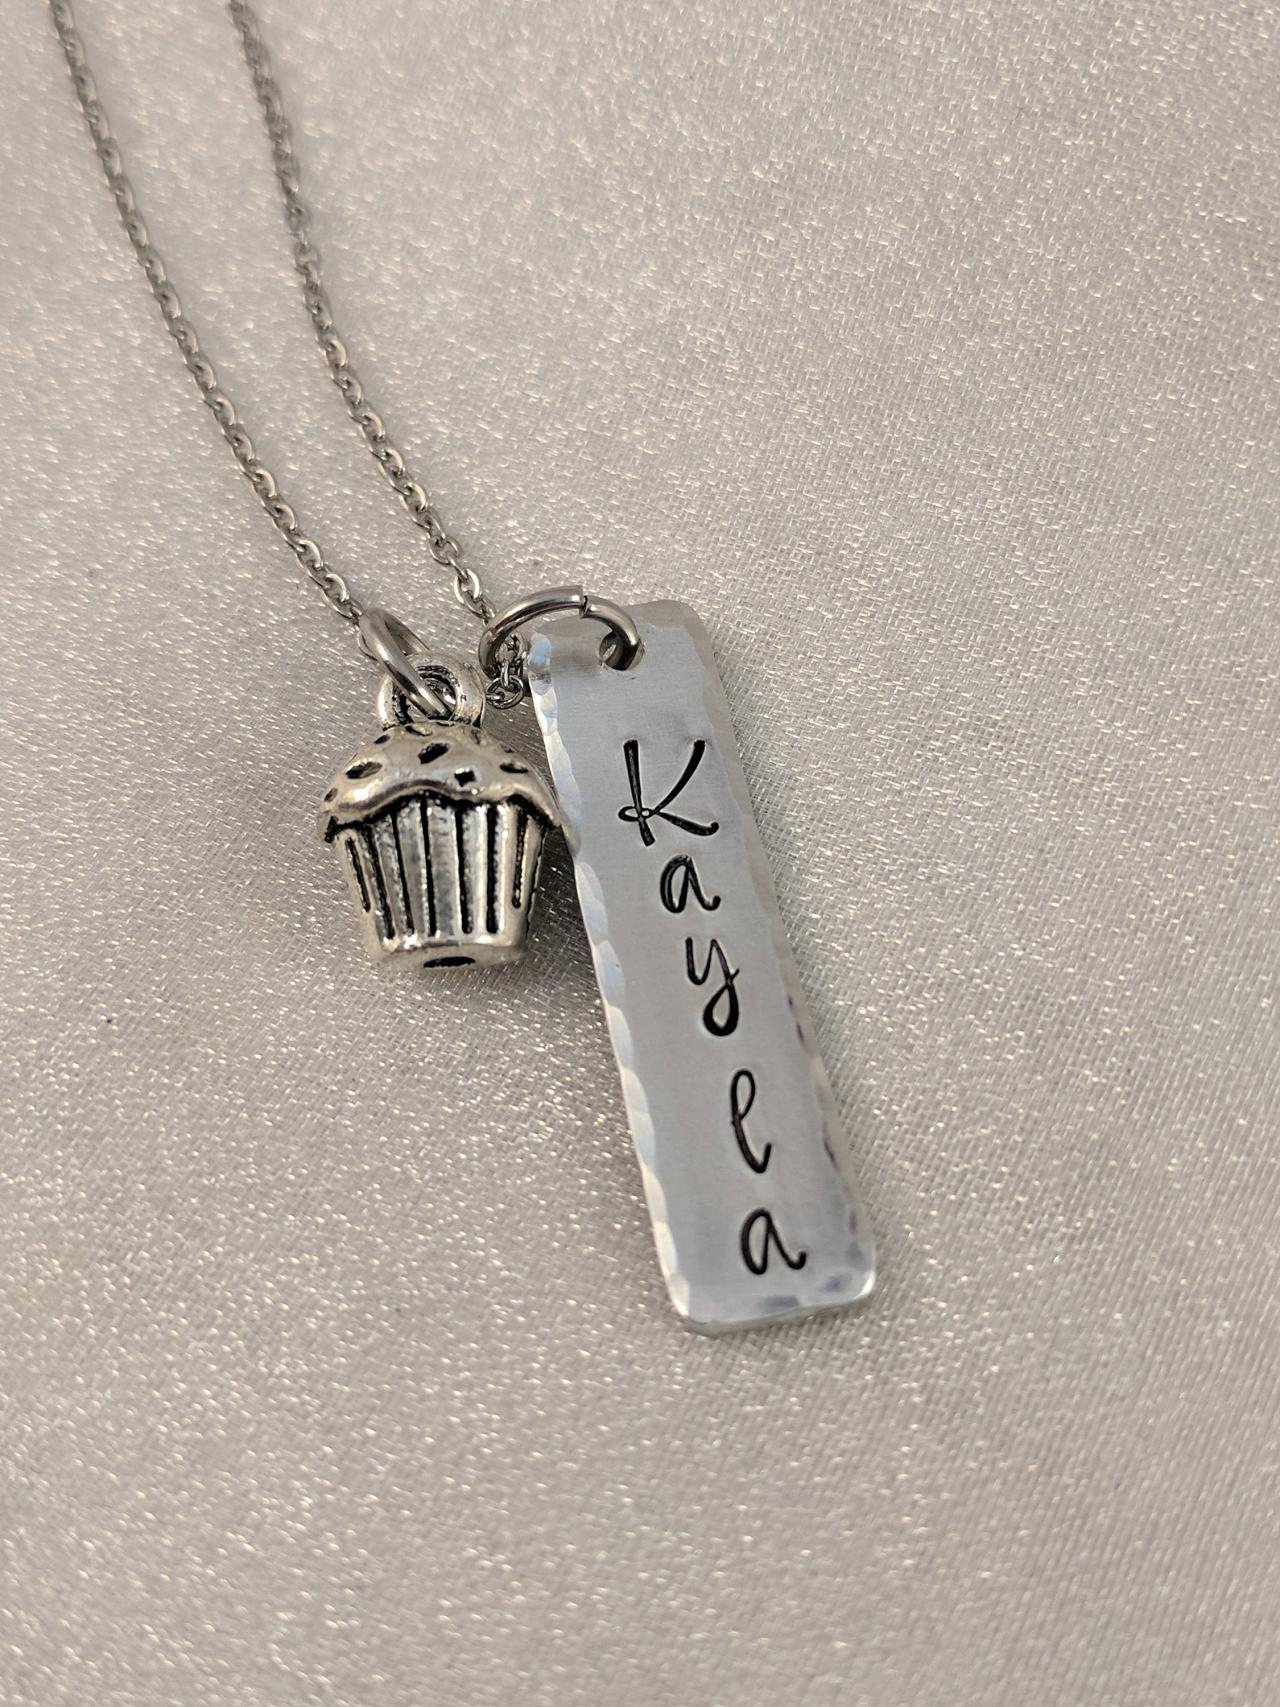 Personalized Hand Stamped Necklace -name Necklace Jewelry-charm Necklace-metal Stamped Jewelry-christmas Gift-birthday Gift-teen Girl